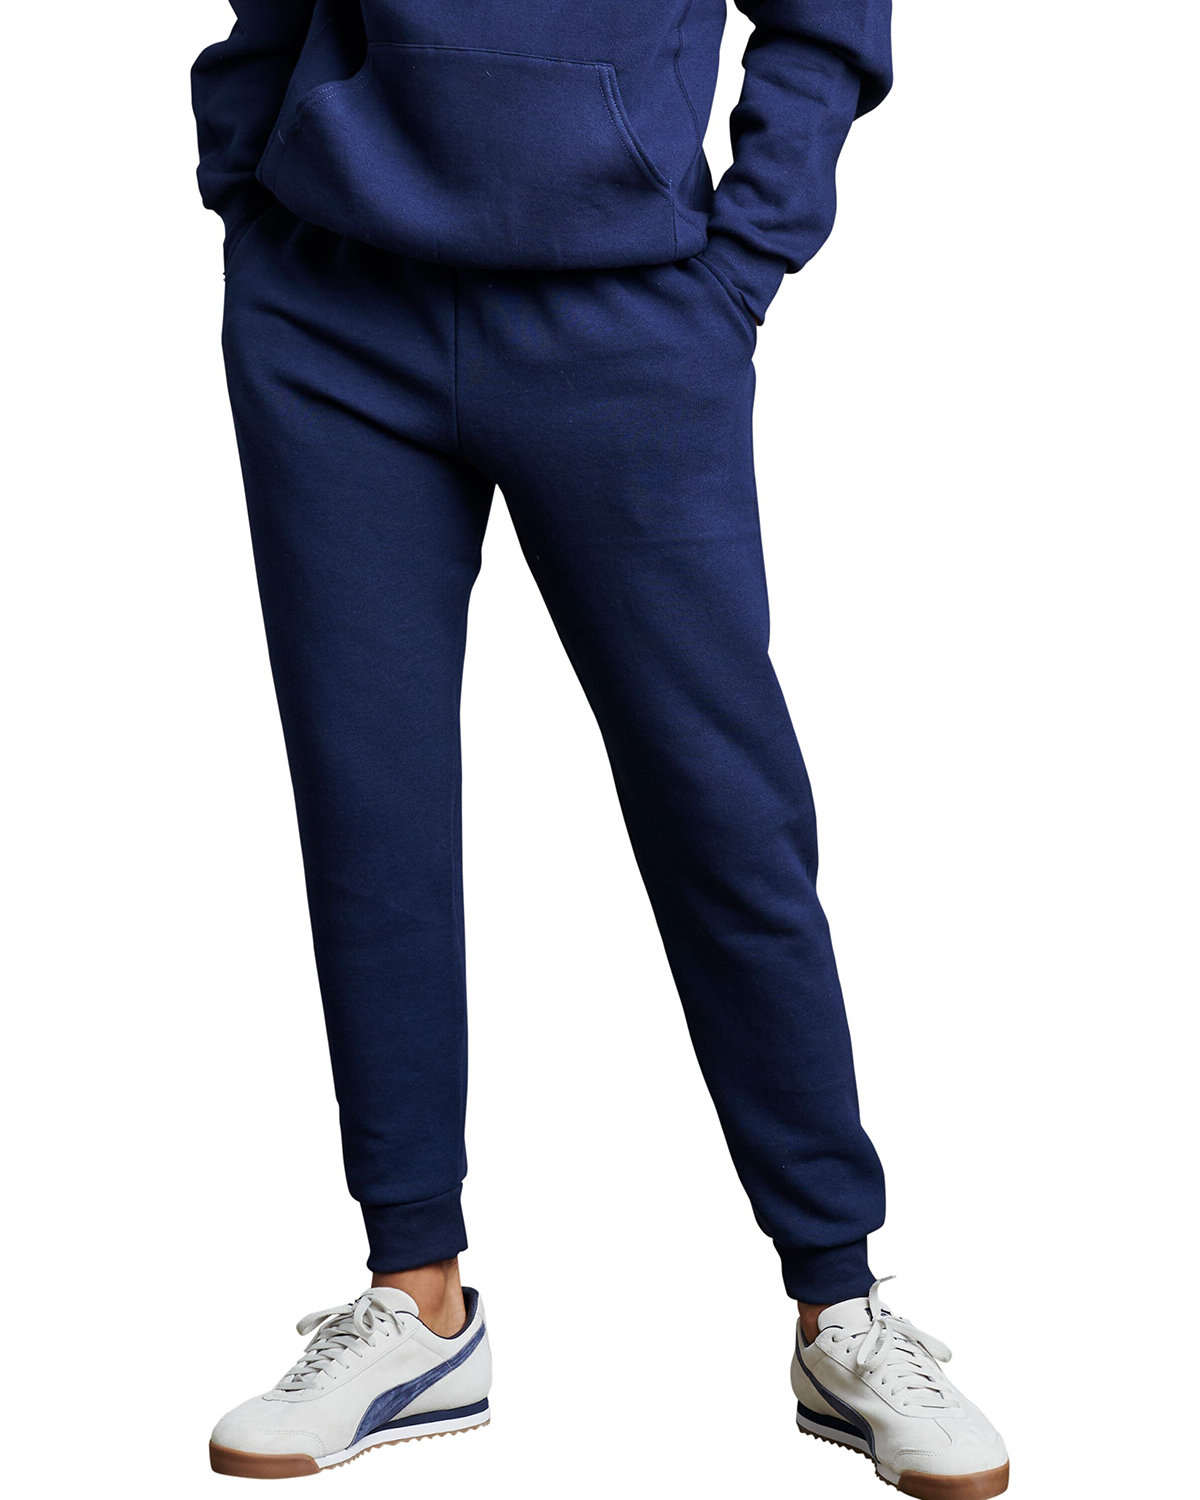 Oalka Blue Athletic Joggers - $17 (32% Off Retail) - From Chelsea